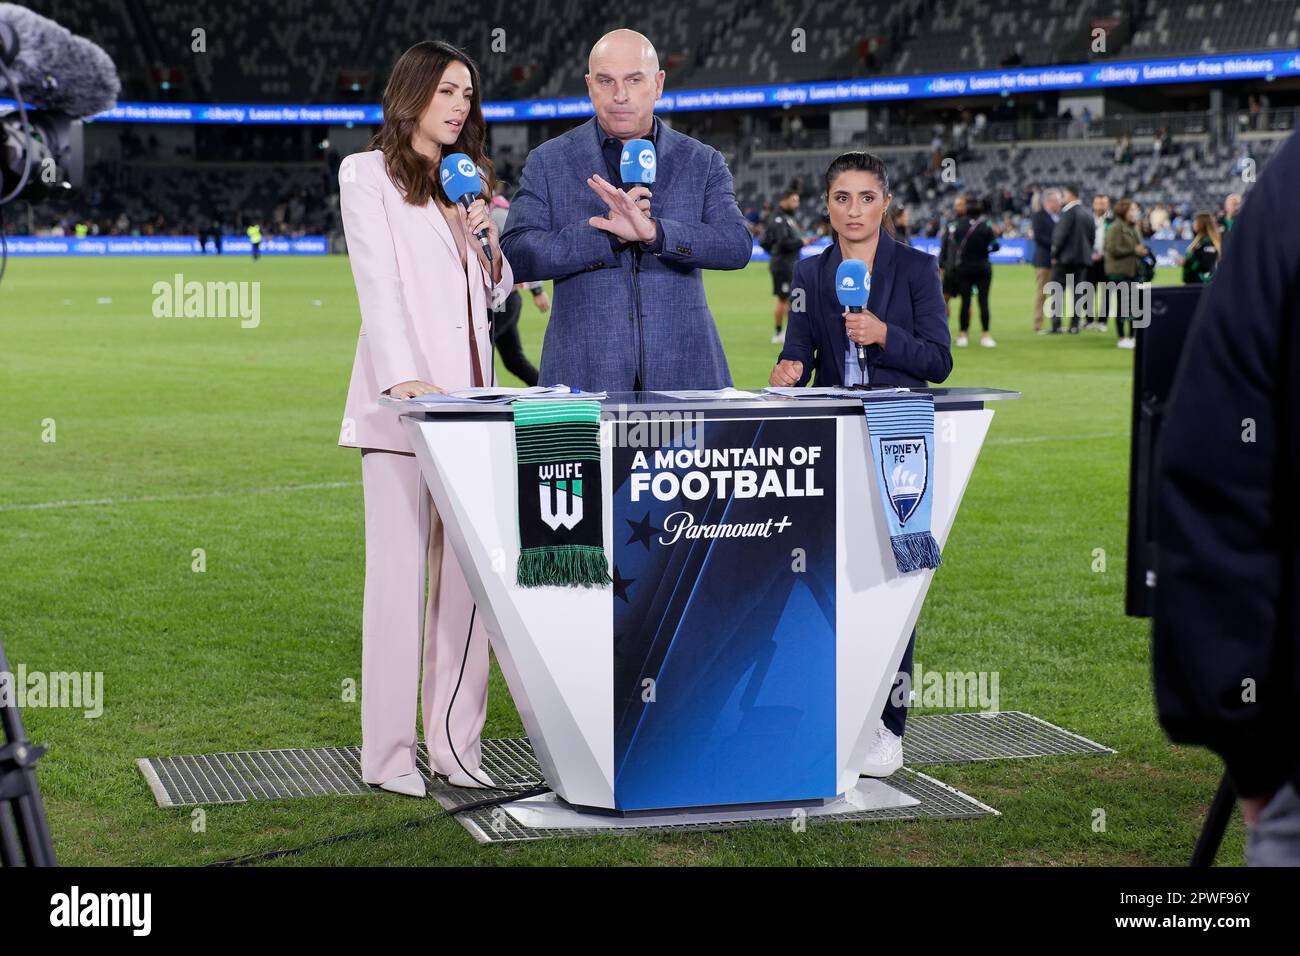 Sydney, Australia. 30th Apr, 2023. Ten Sports hosts, Tara Rushton, Andy Harper and Teresa Polias commentating after the Grand Final match between Western United and Sydney at CommBank Stadium on April 30, 2023 in Sydney, Australia Credit: IOIO IMAGES/Alamy Live News Stock Photo